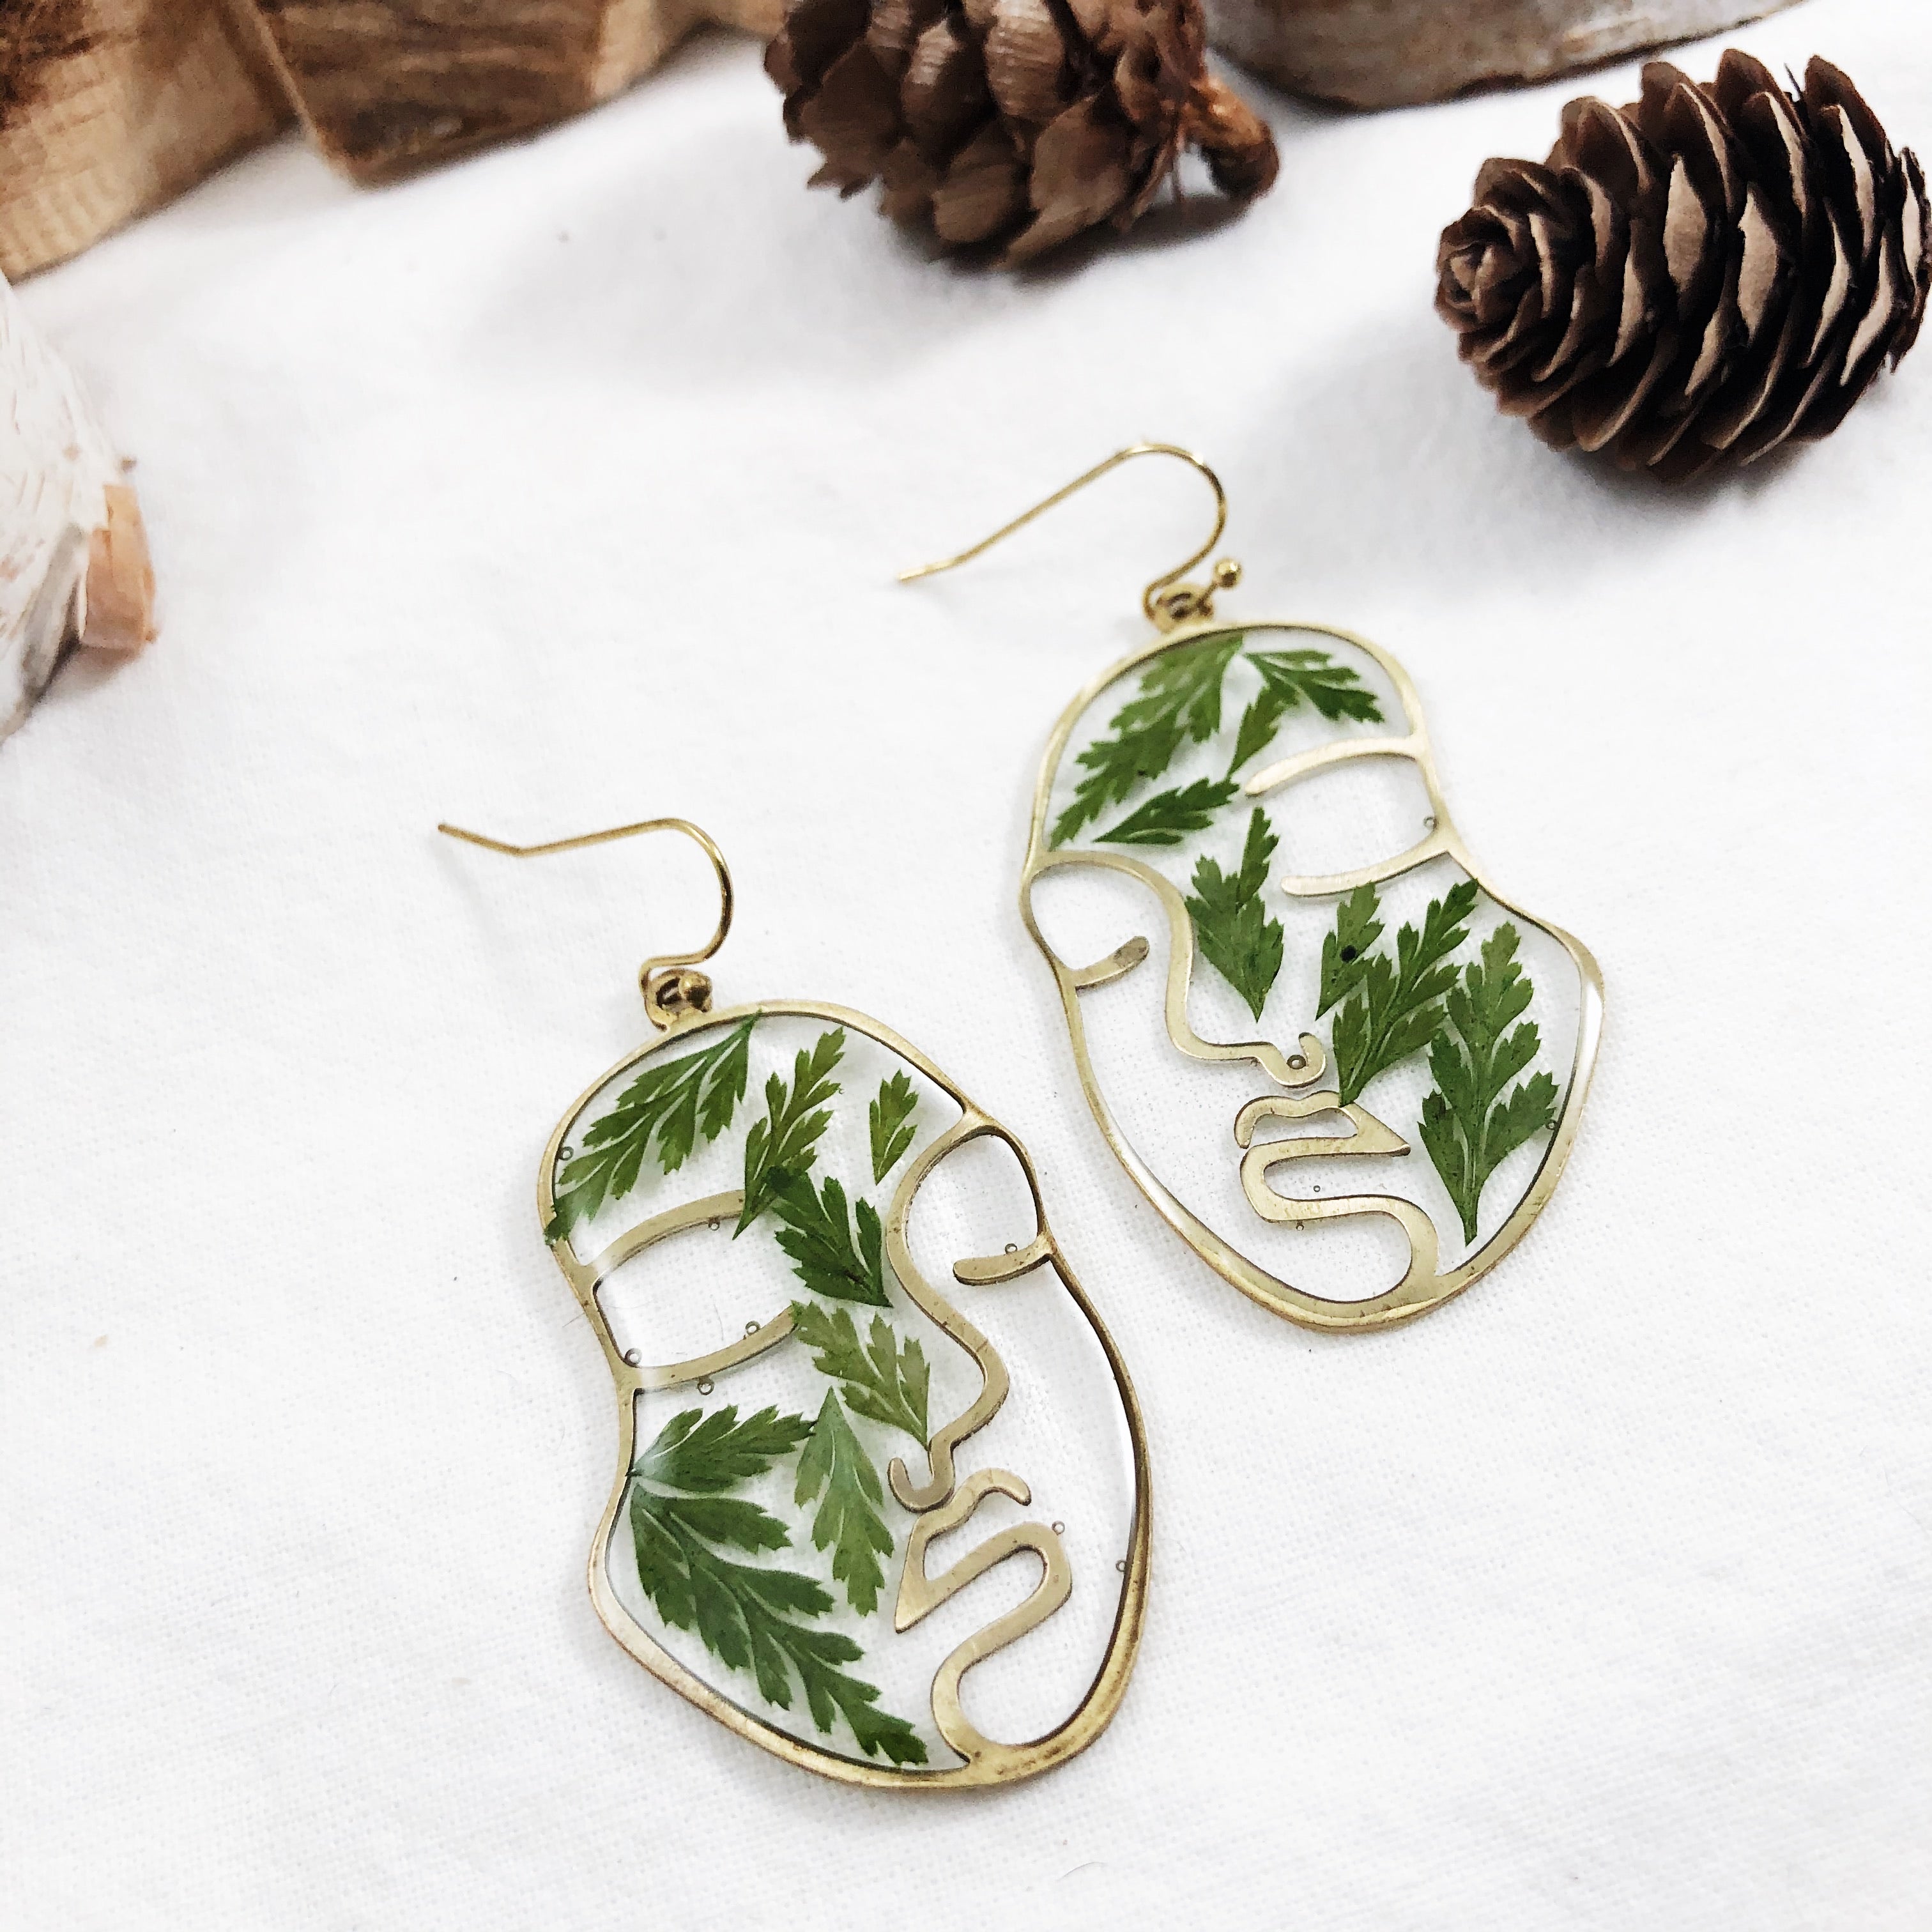 Blythe - Brass Abstract Face Earrings with Preserved Ferns